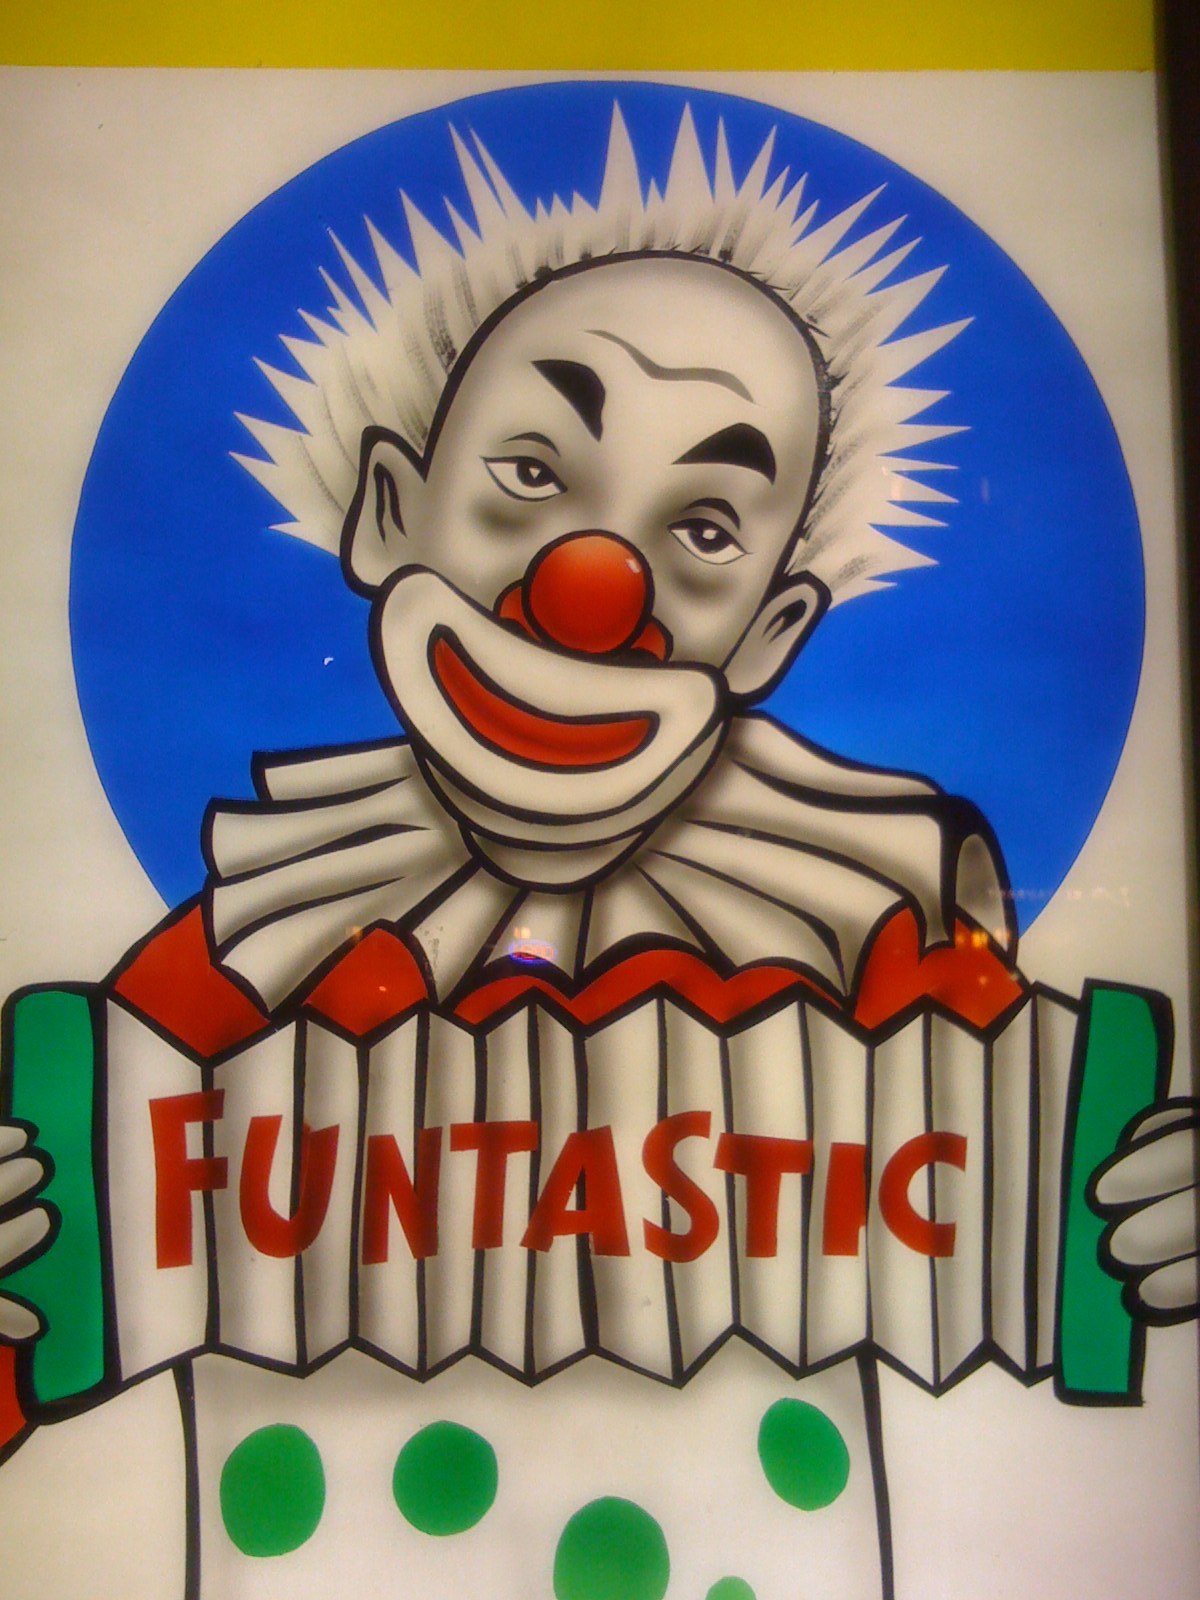 a sign advertising a funtastic clown holding an accordion